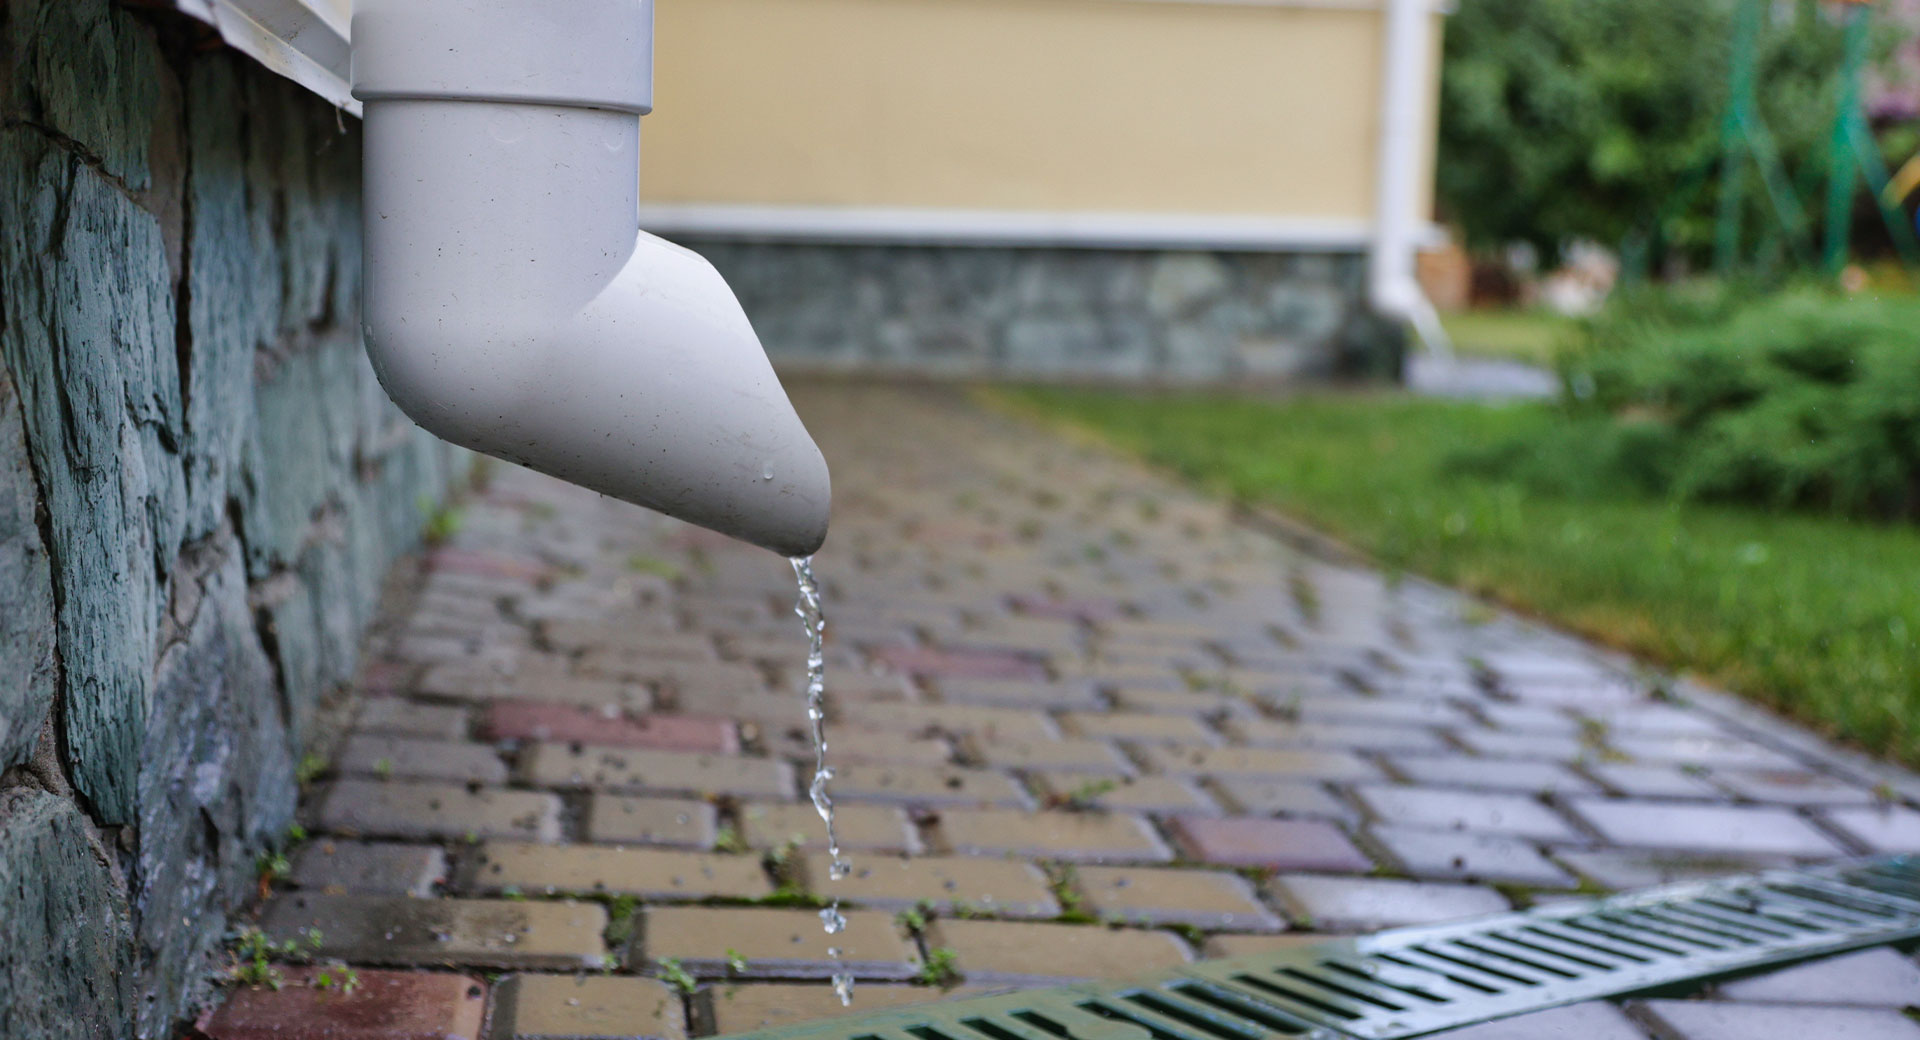 A close-up of water dripping from a house drainpipe into a drain in a paved area of a garden
                        